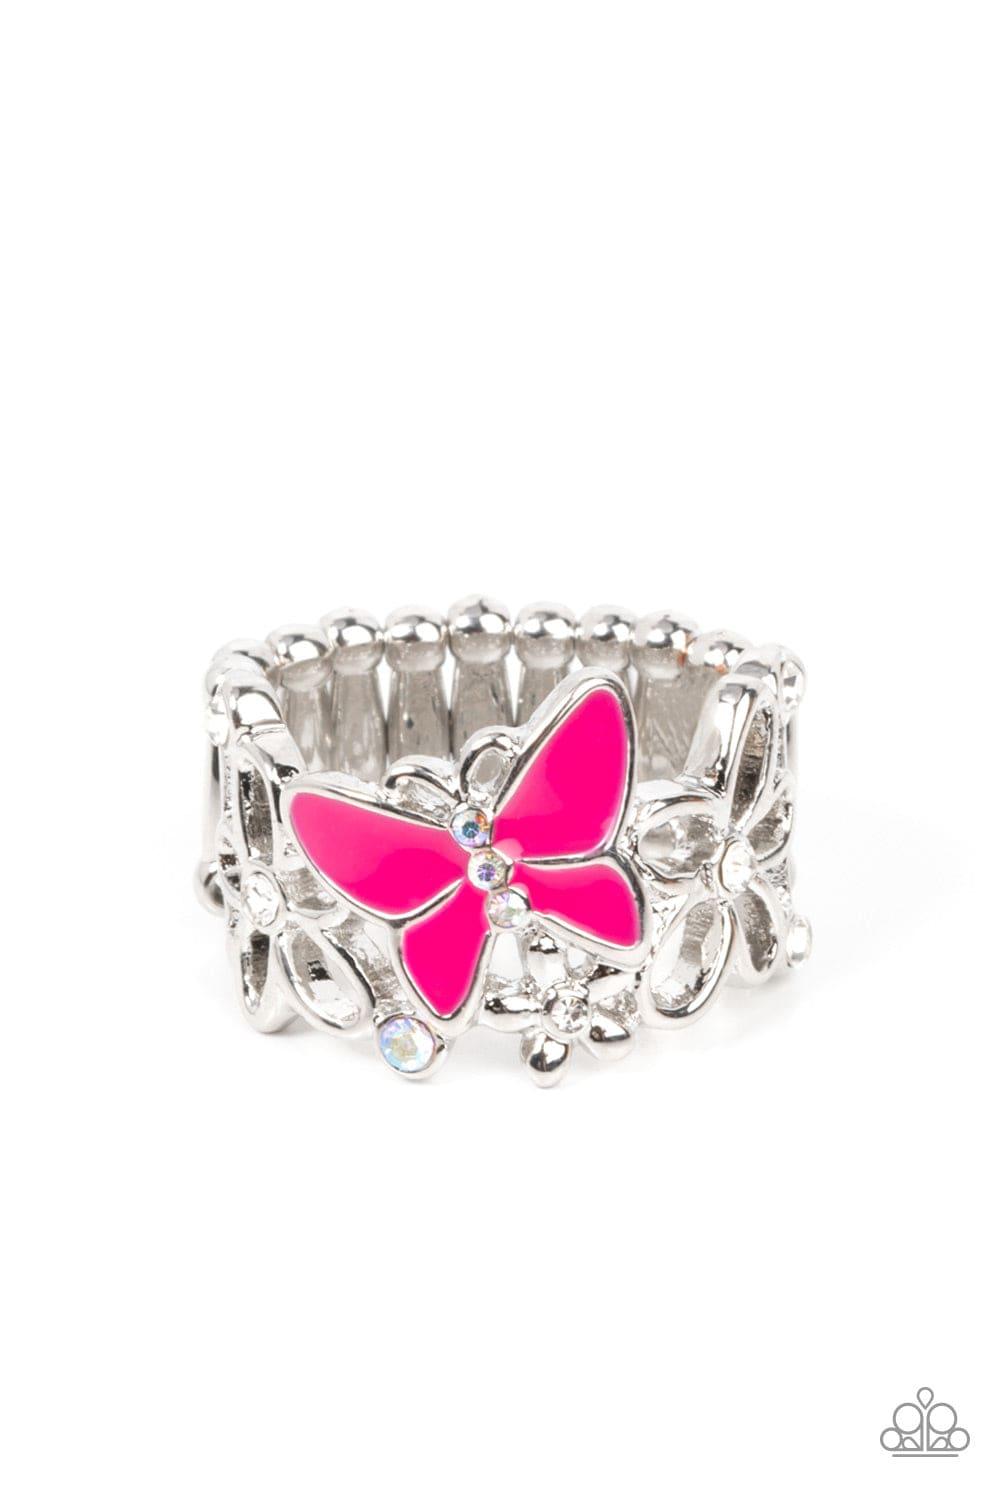 Paparazzi Accessories - All Fluttered Up - Pink Ring - Bling by JessieK